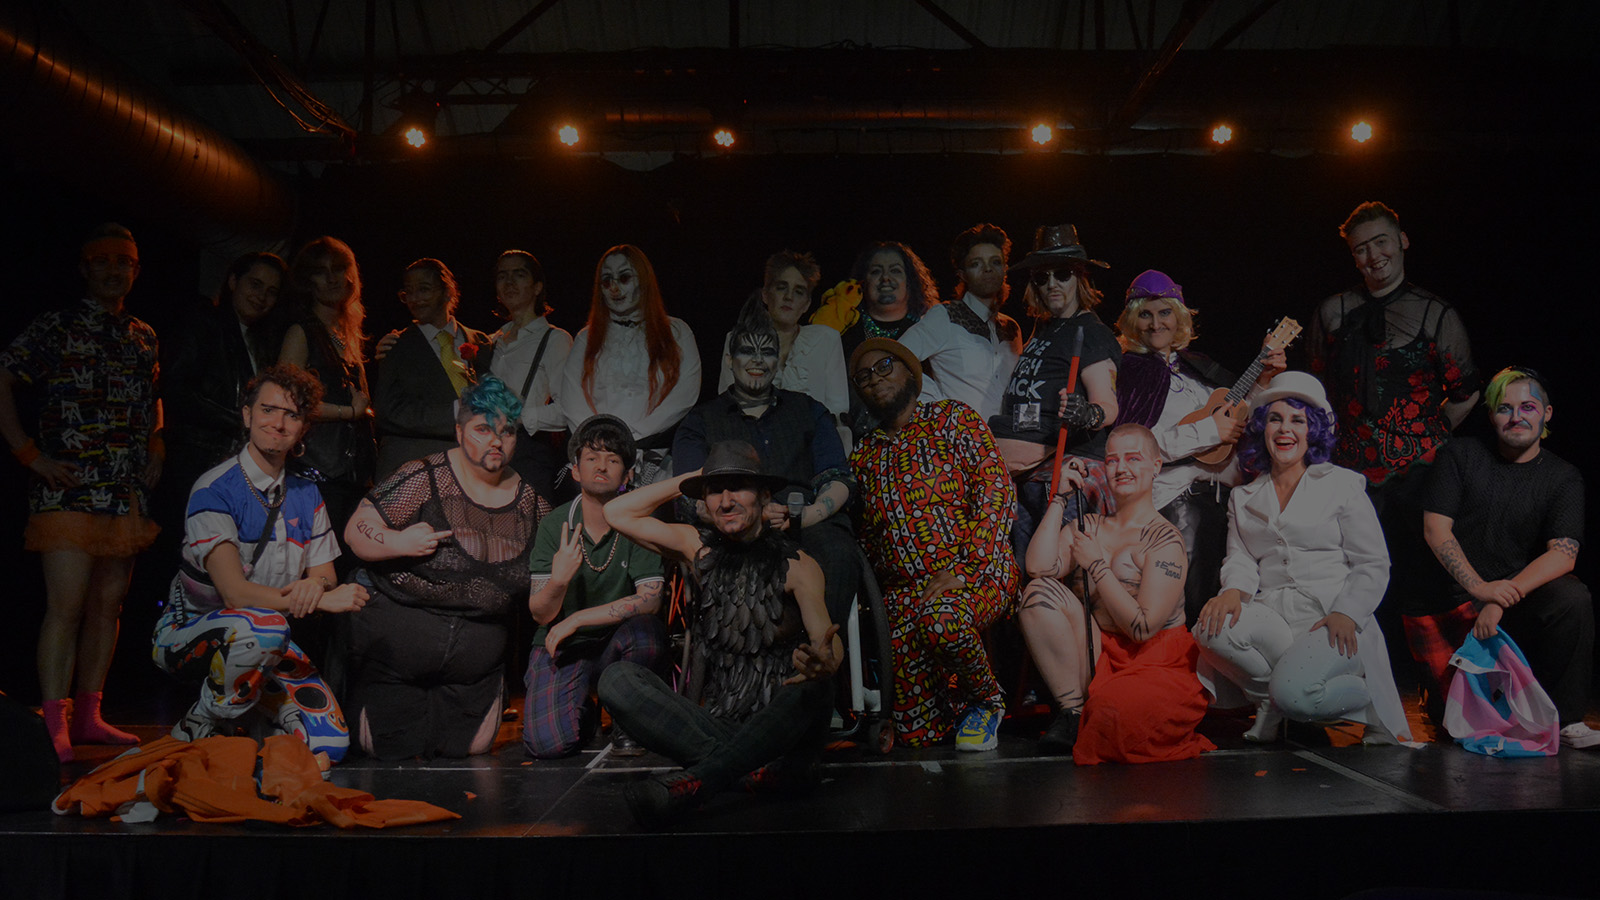 Drag Kings gathered together onstage at a Shut Up and King event